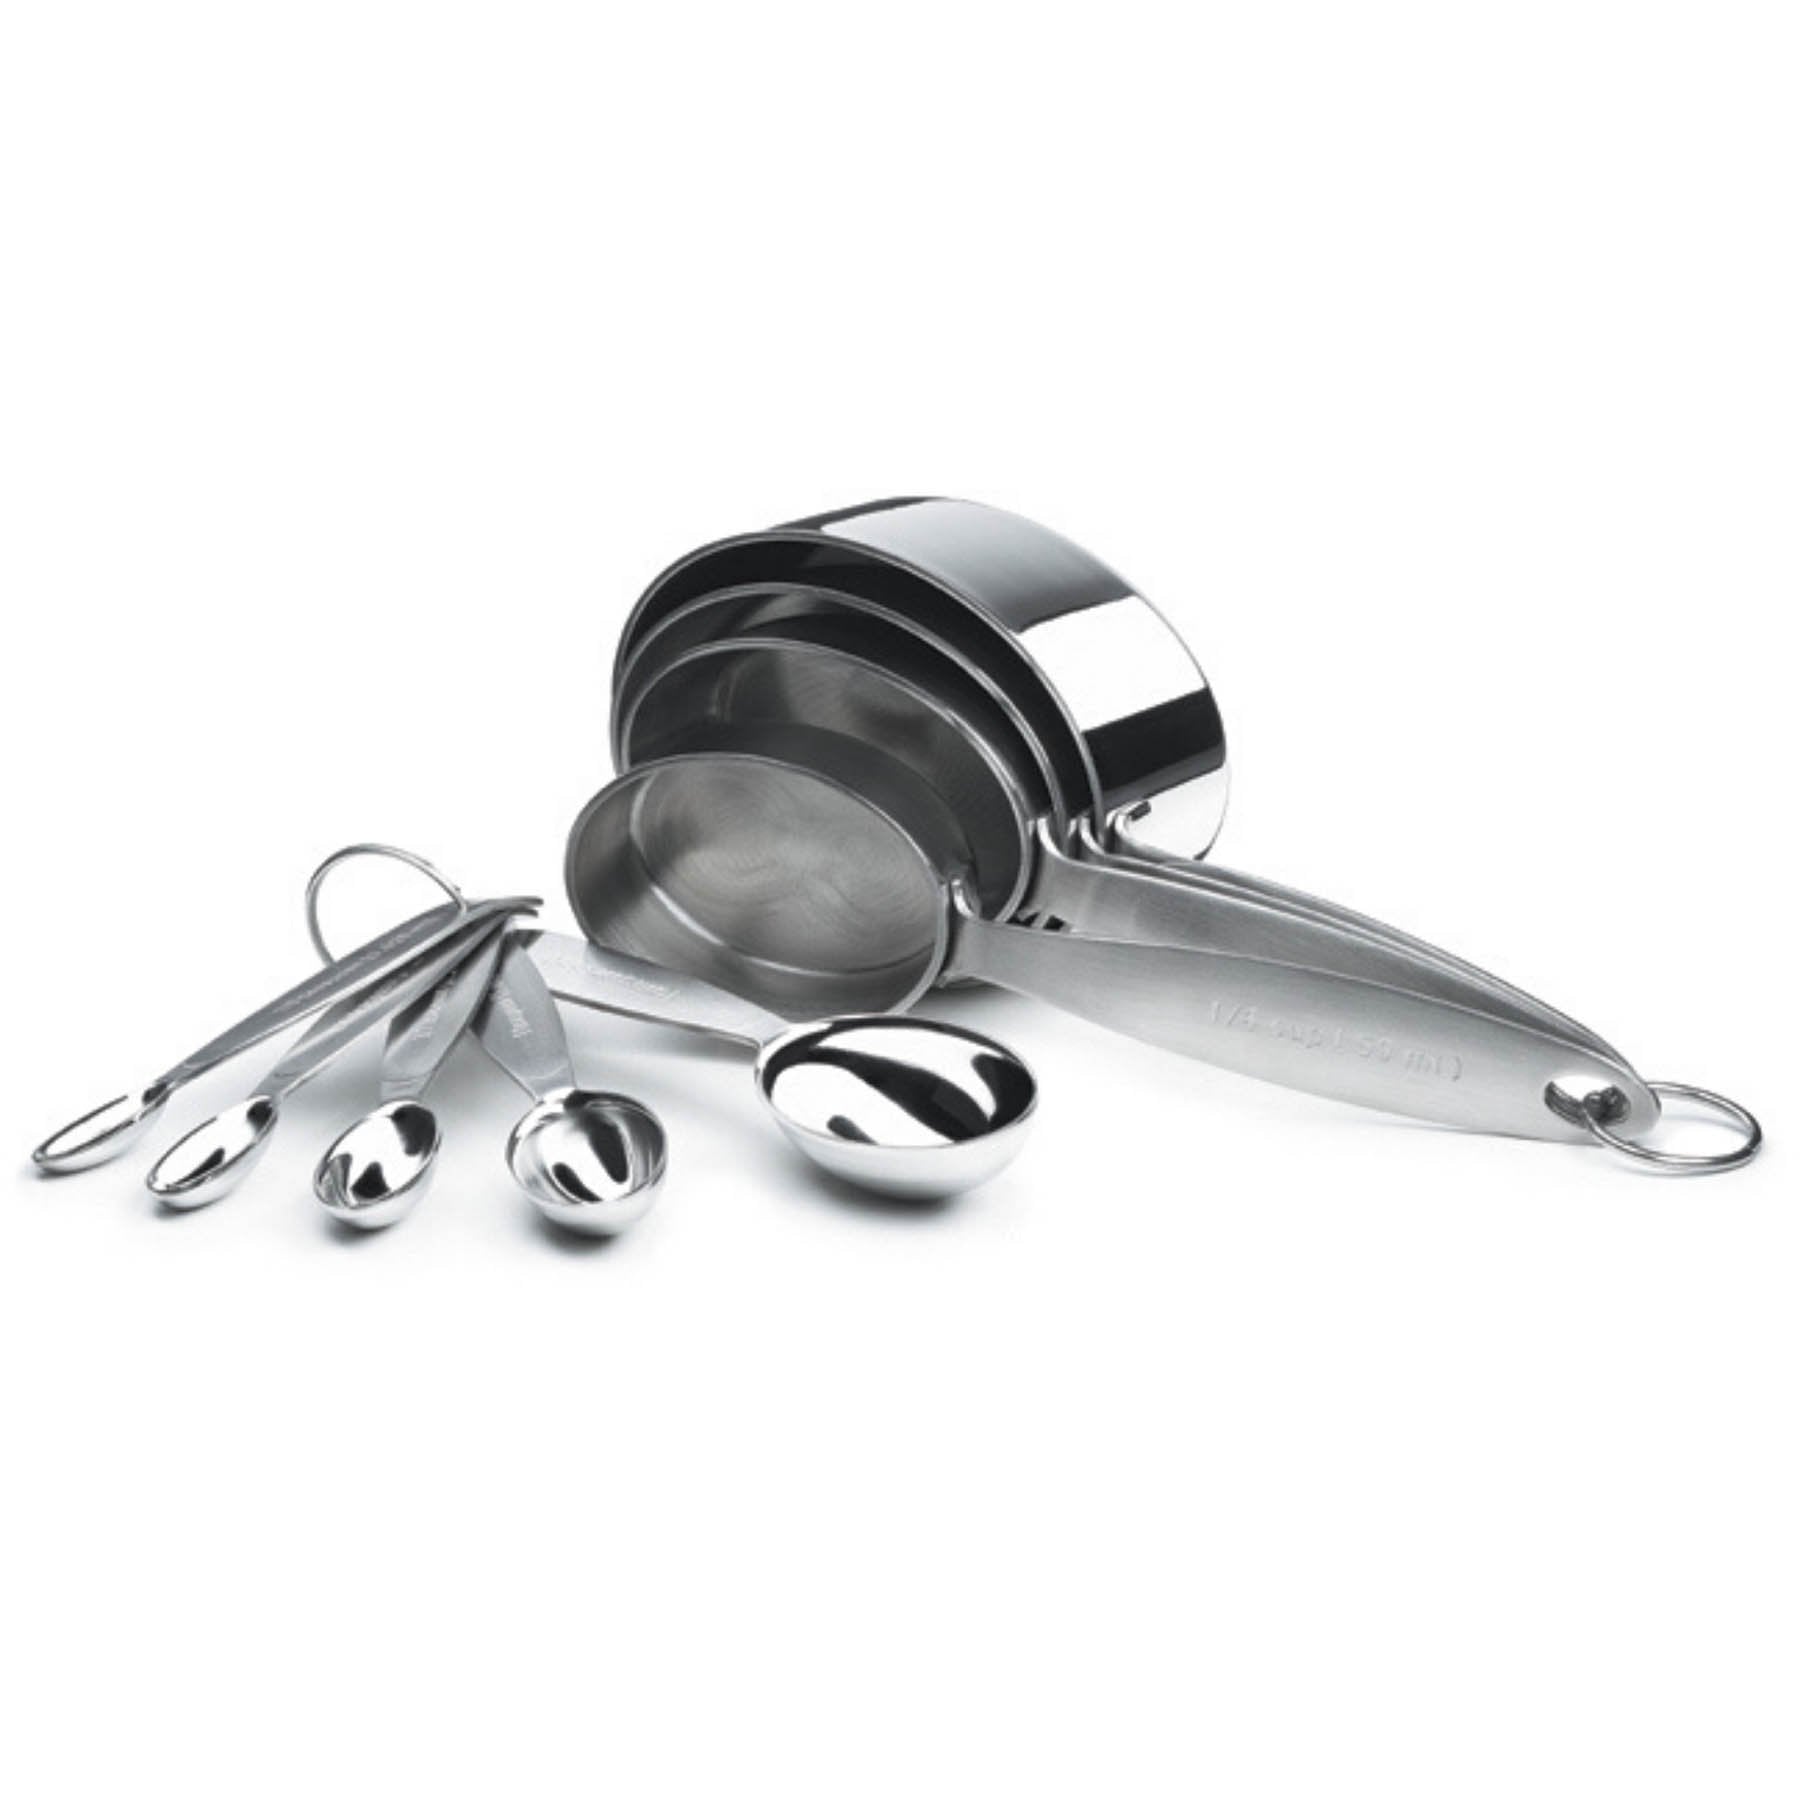 Heavy Duty Stainless Steel Dry Measuring Cups - Set of Four